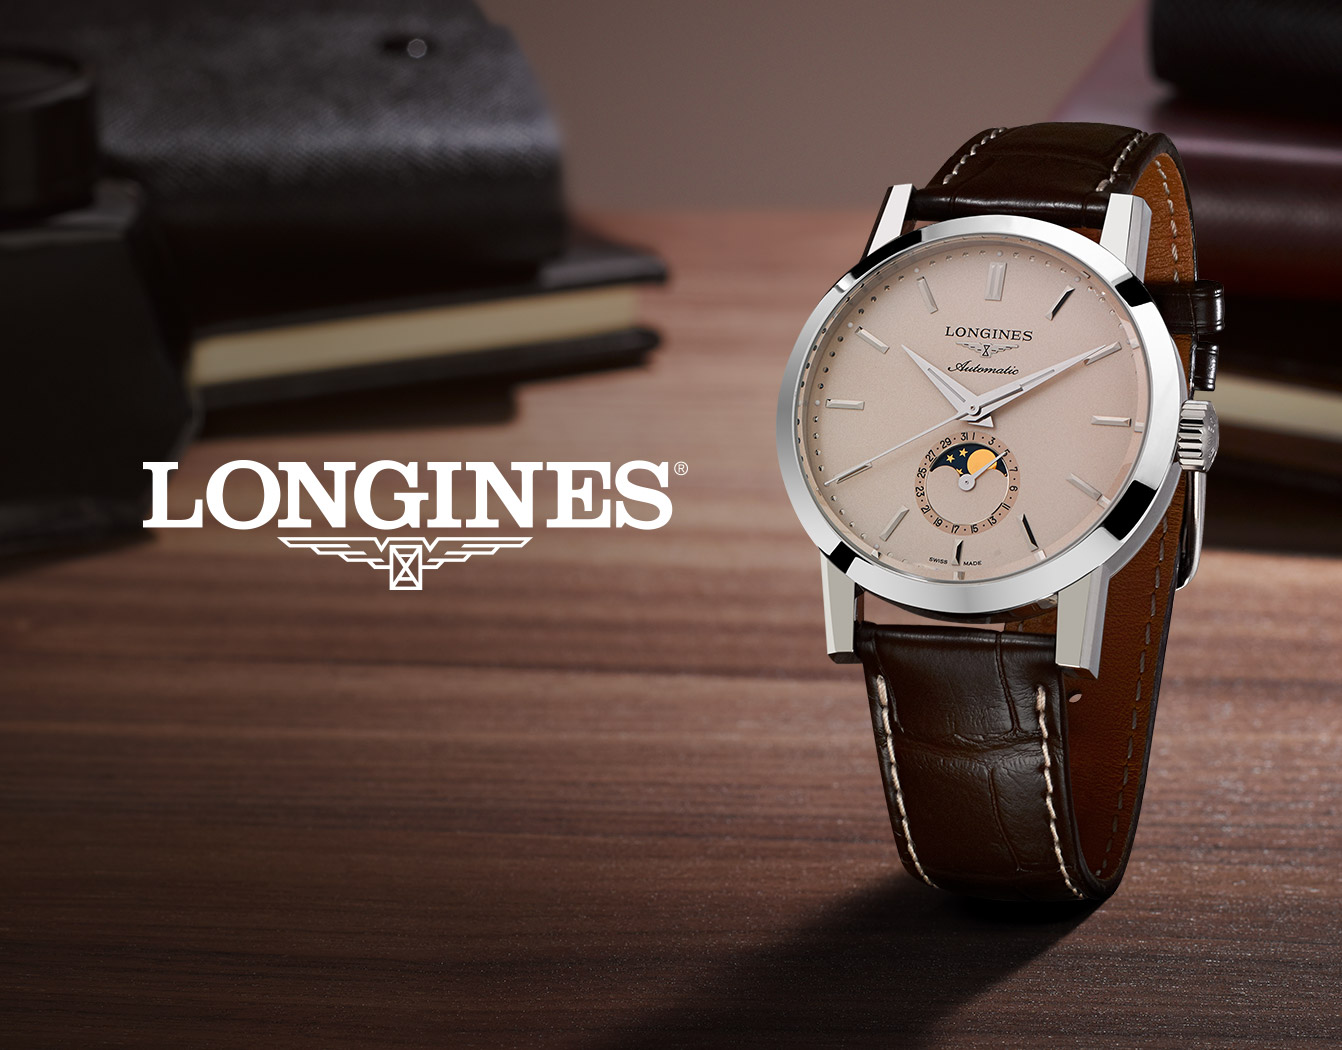 A New Chapter in the Longines 1832 Iconic Tale